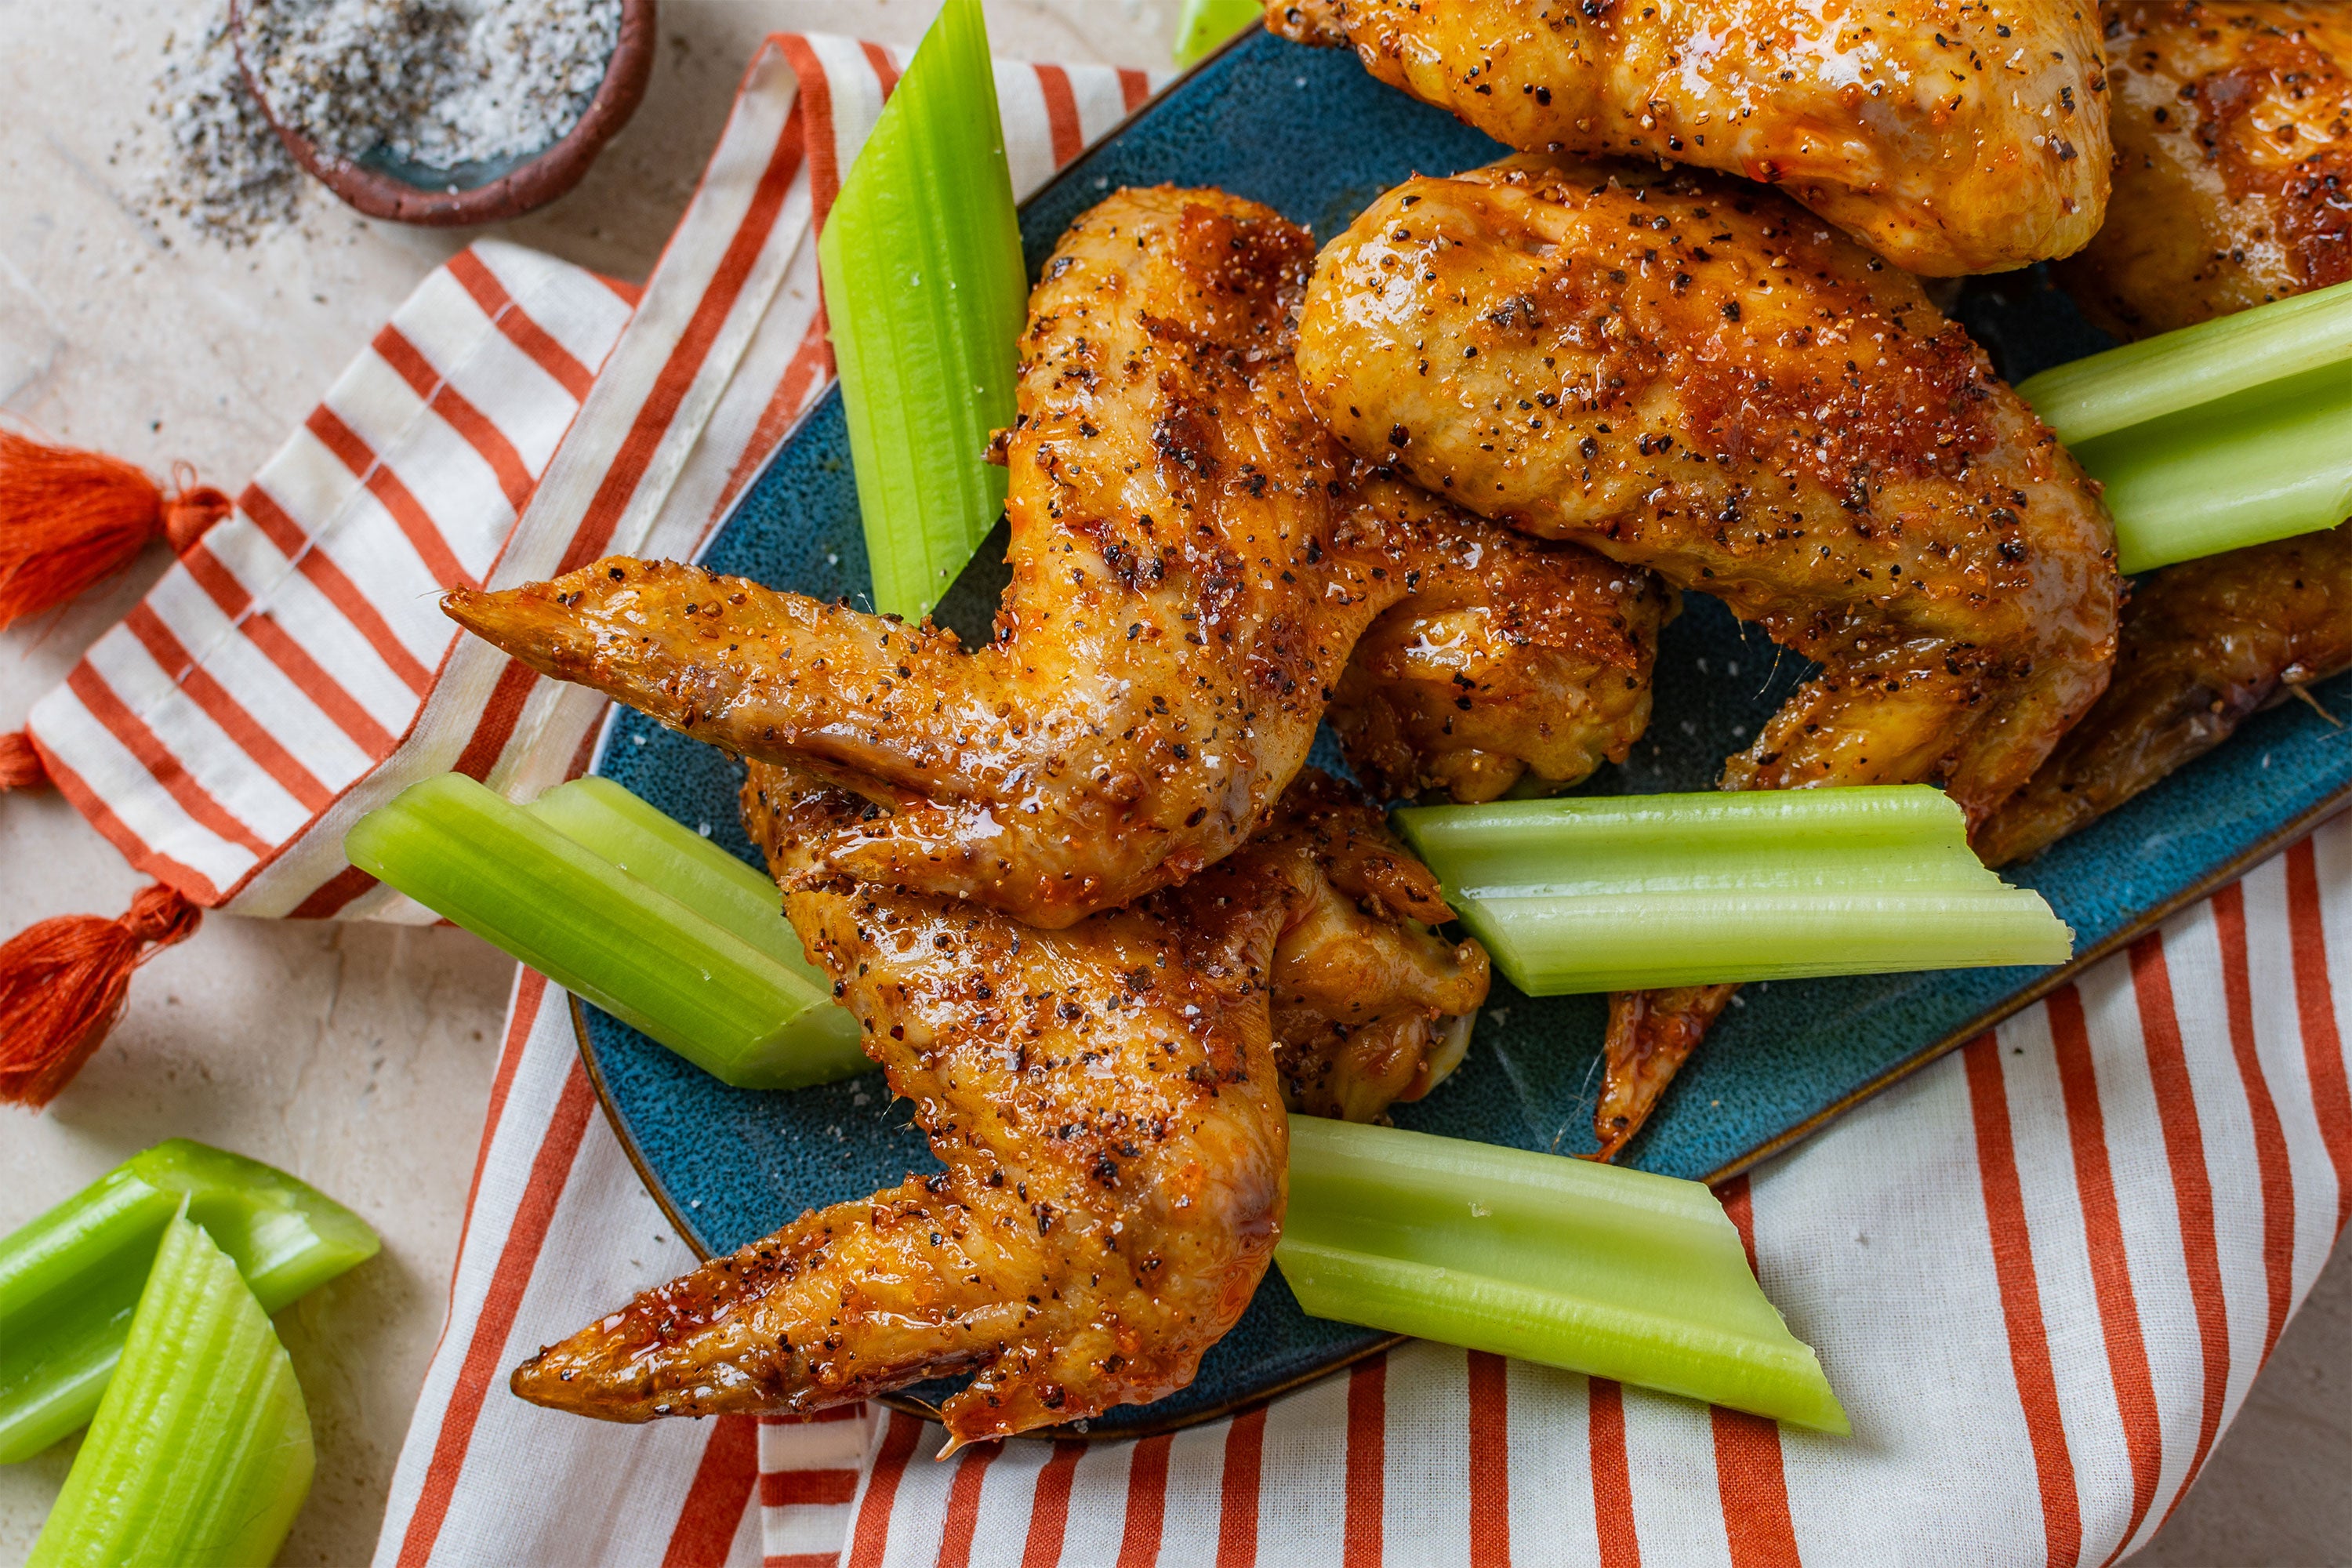 Pepper Chicken Wings with celery on a striped napkin